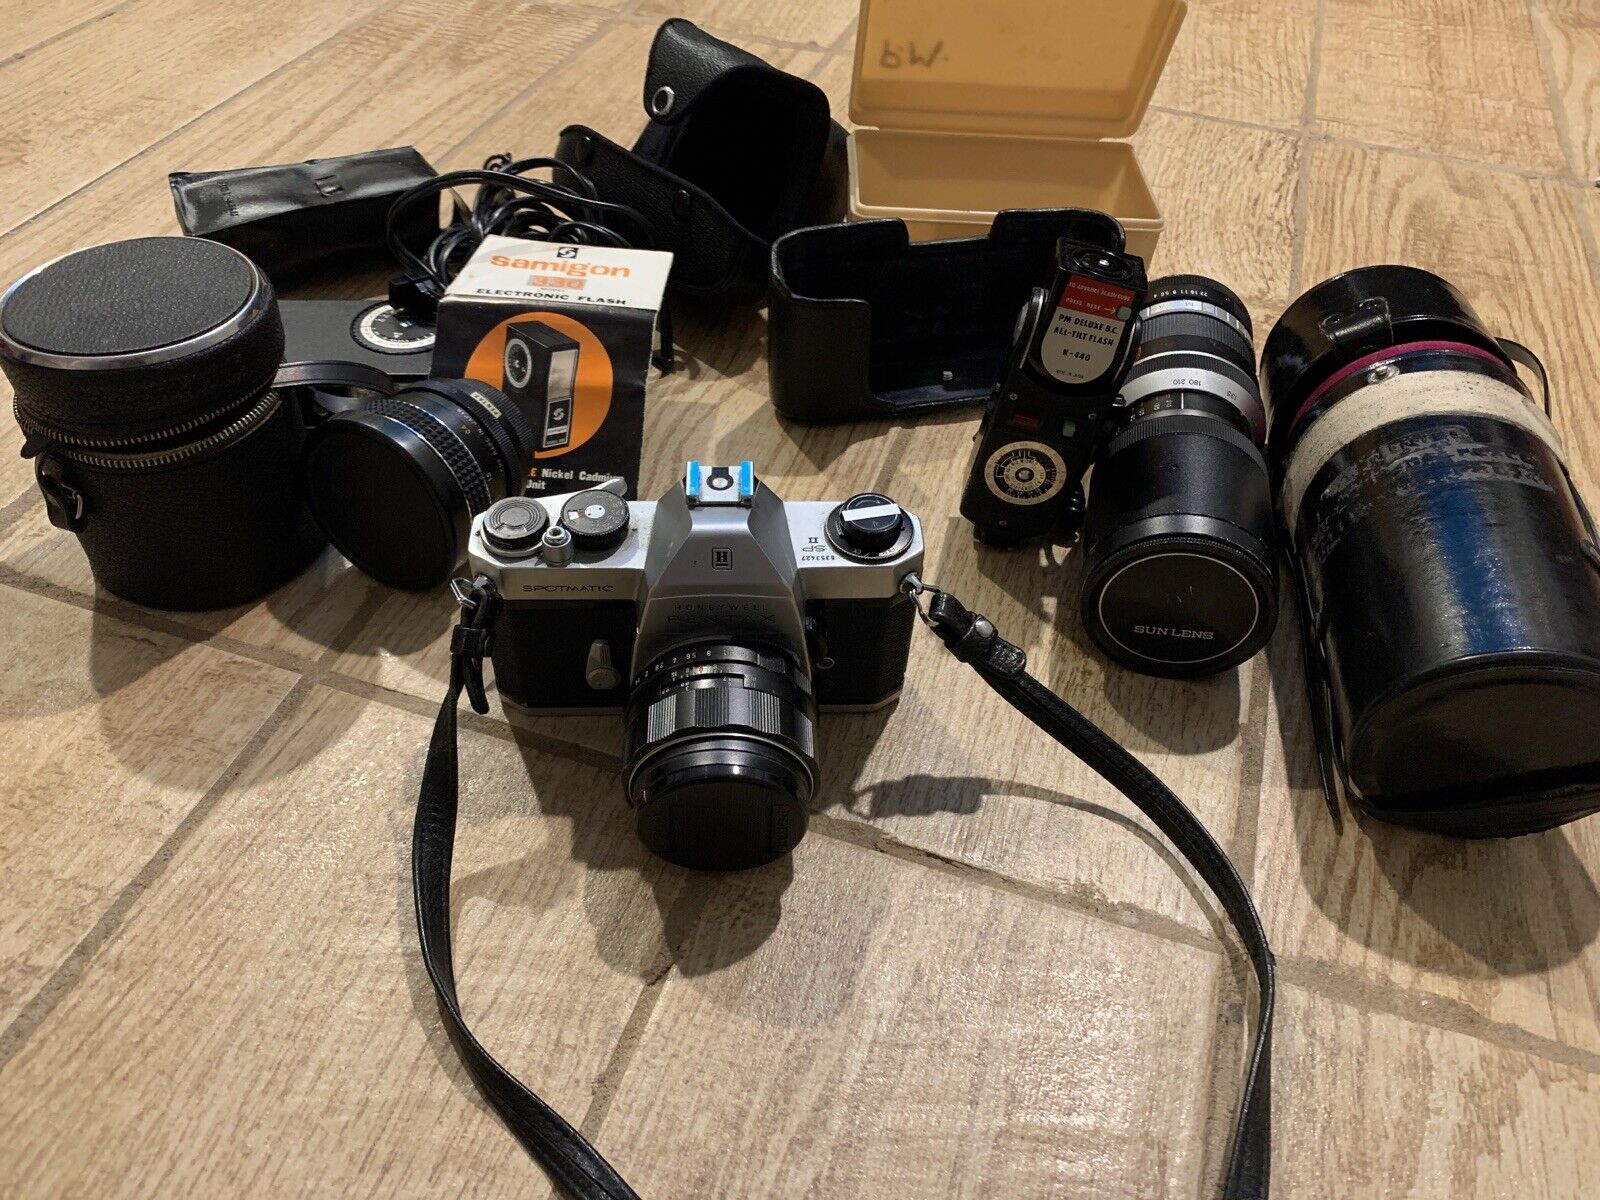 Honeywell Pentax Spotmatic II Camera With Multiple lenses And Accessories